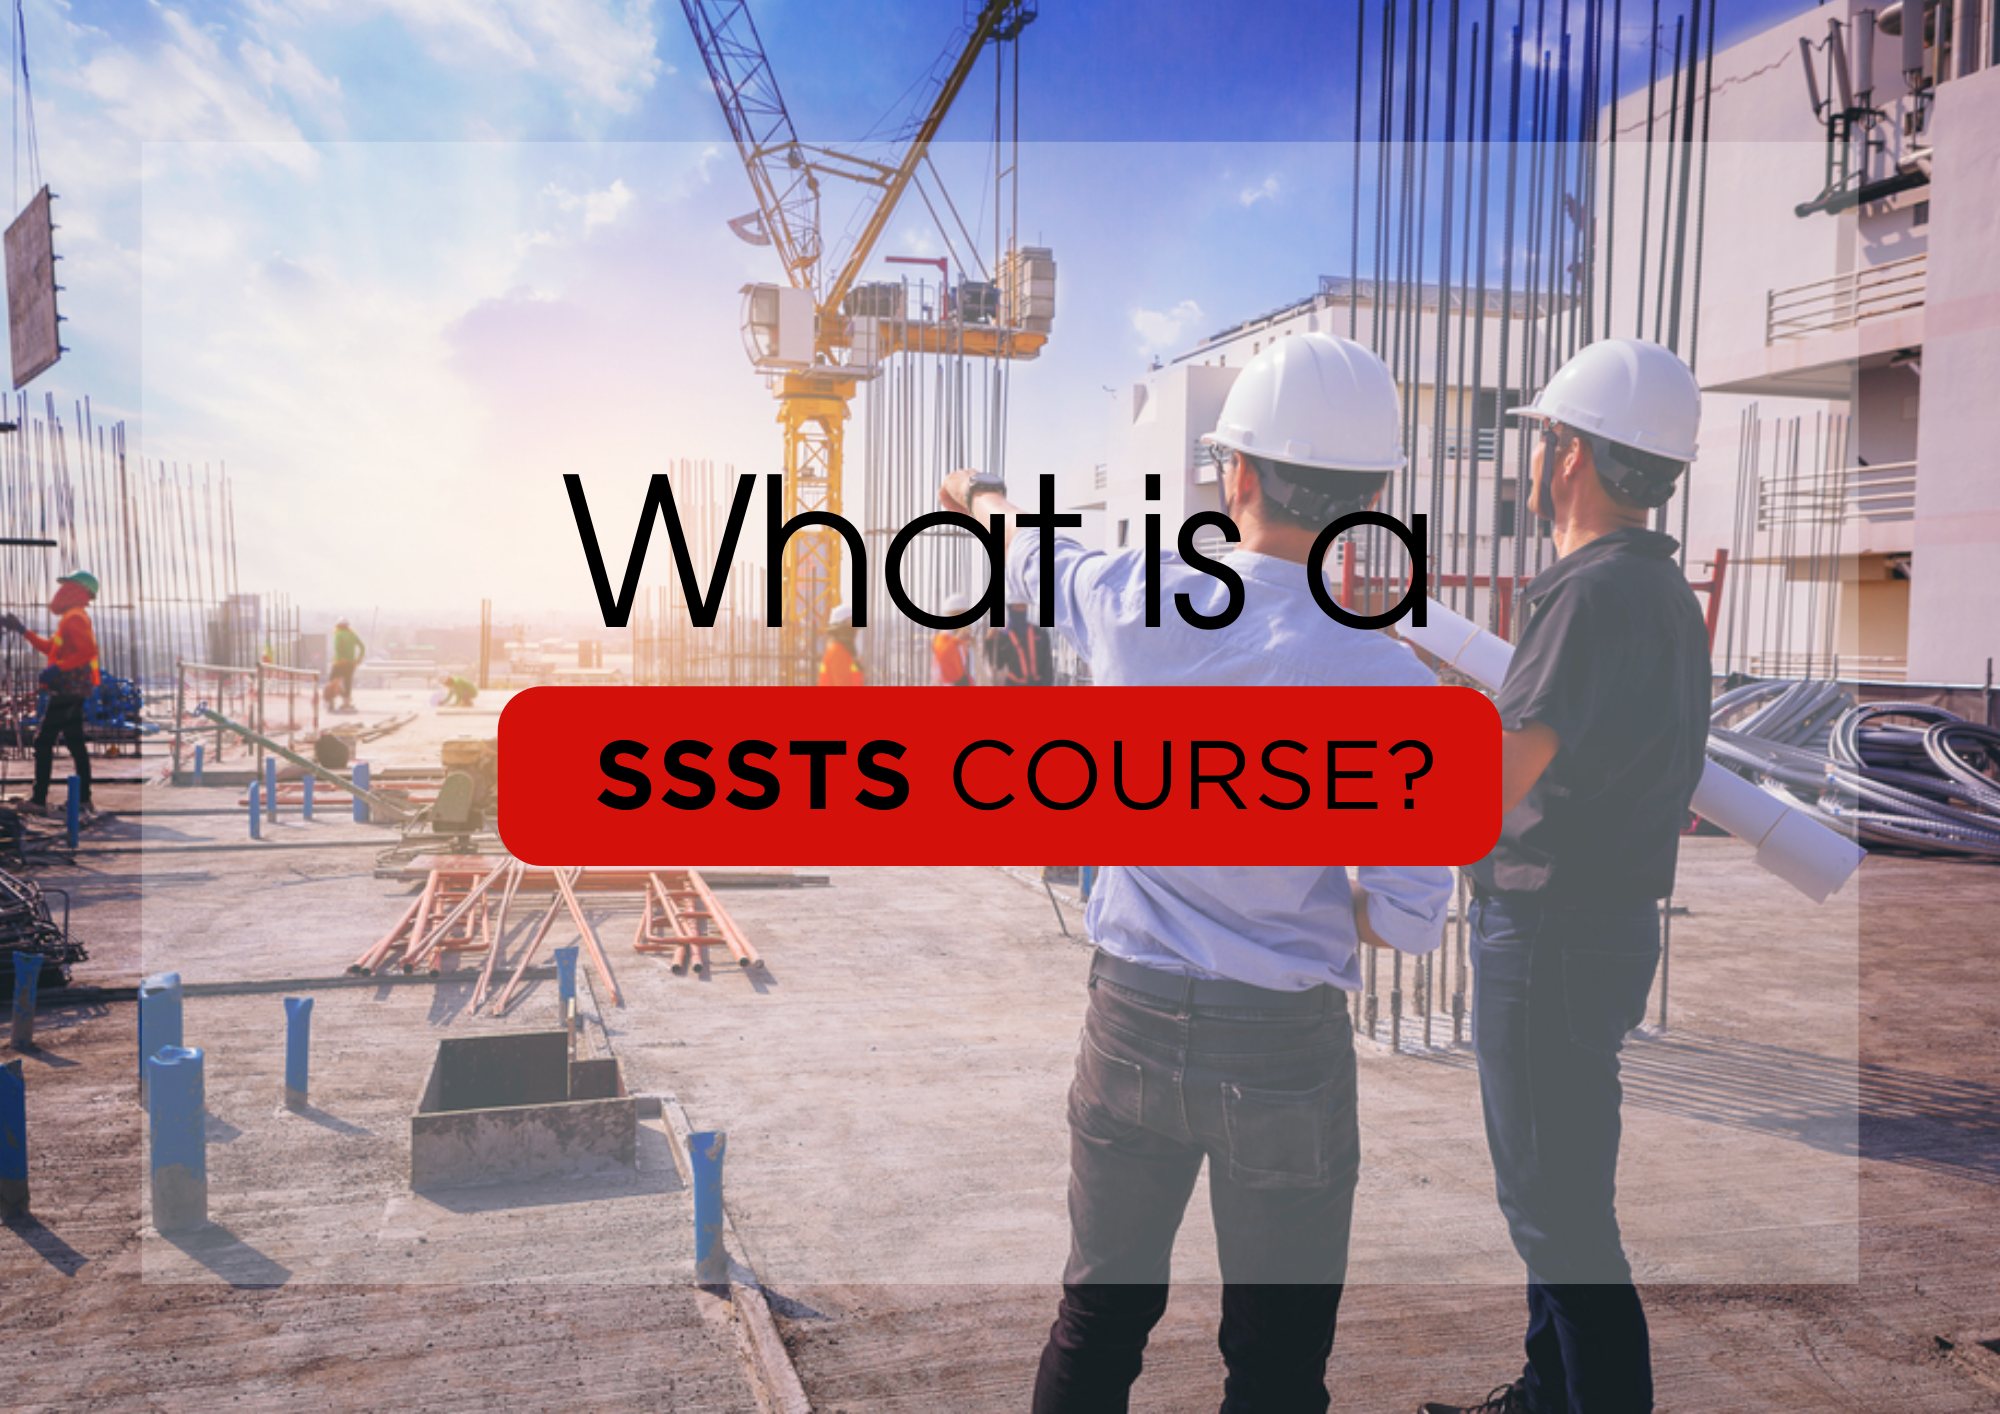 What is a SSSTS course?